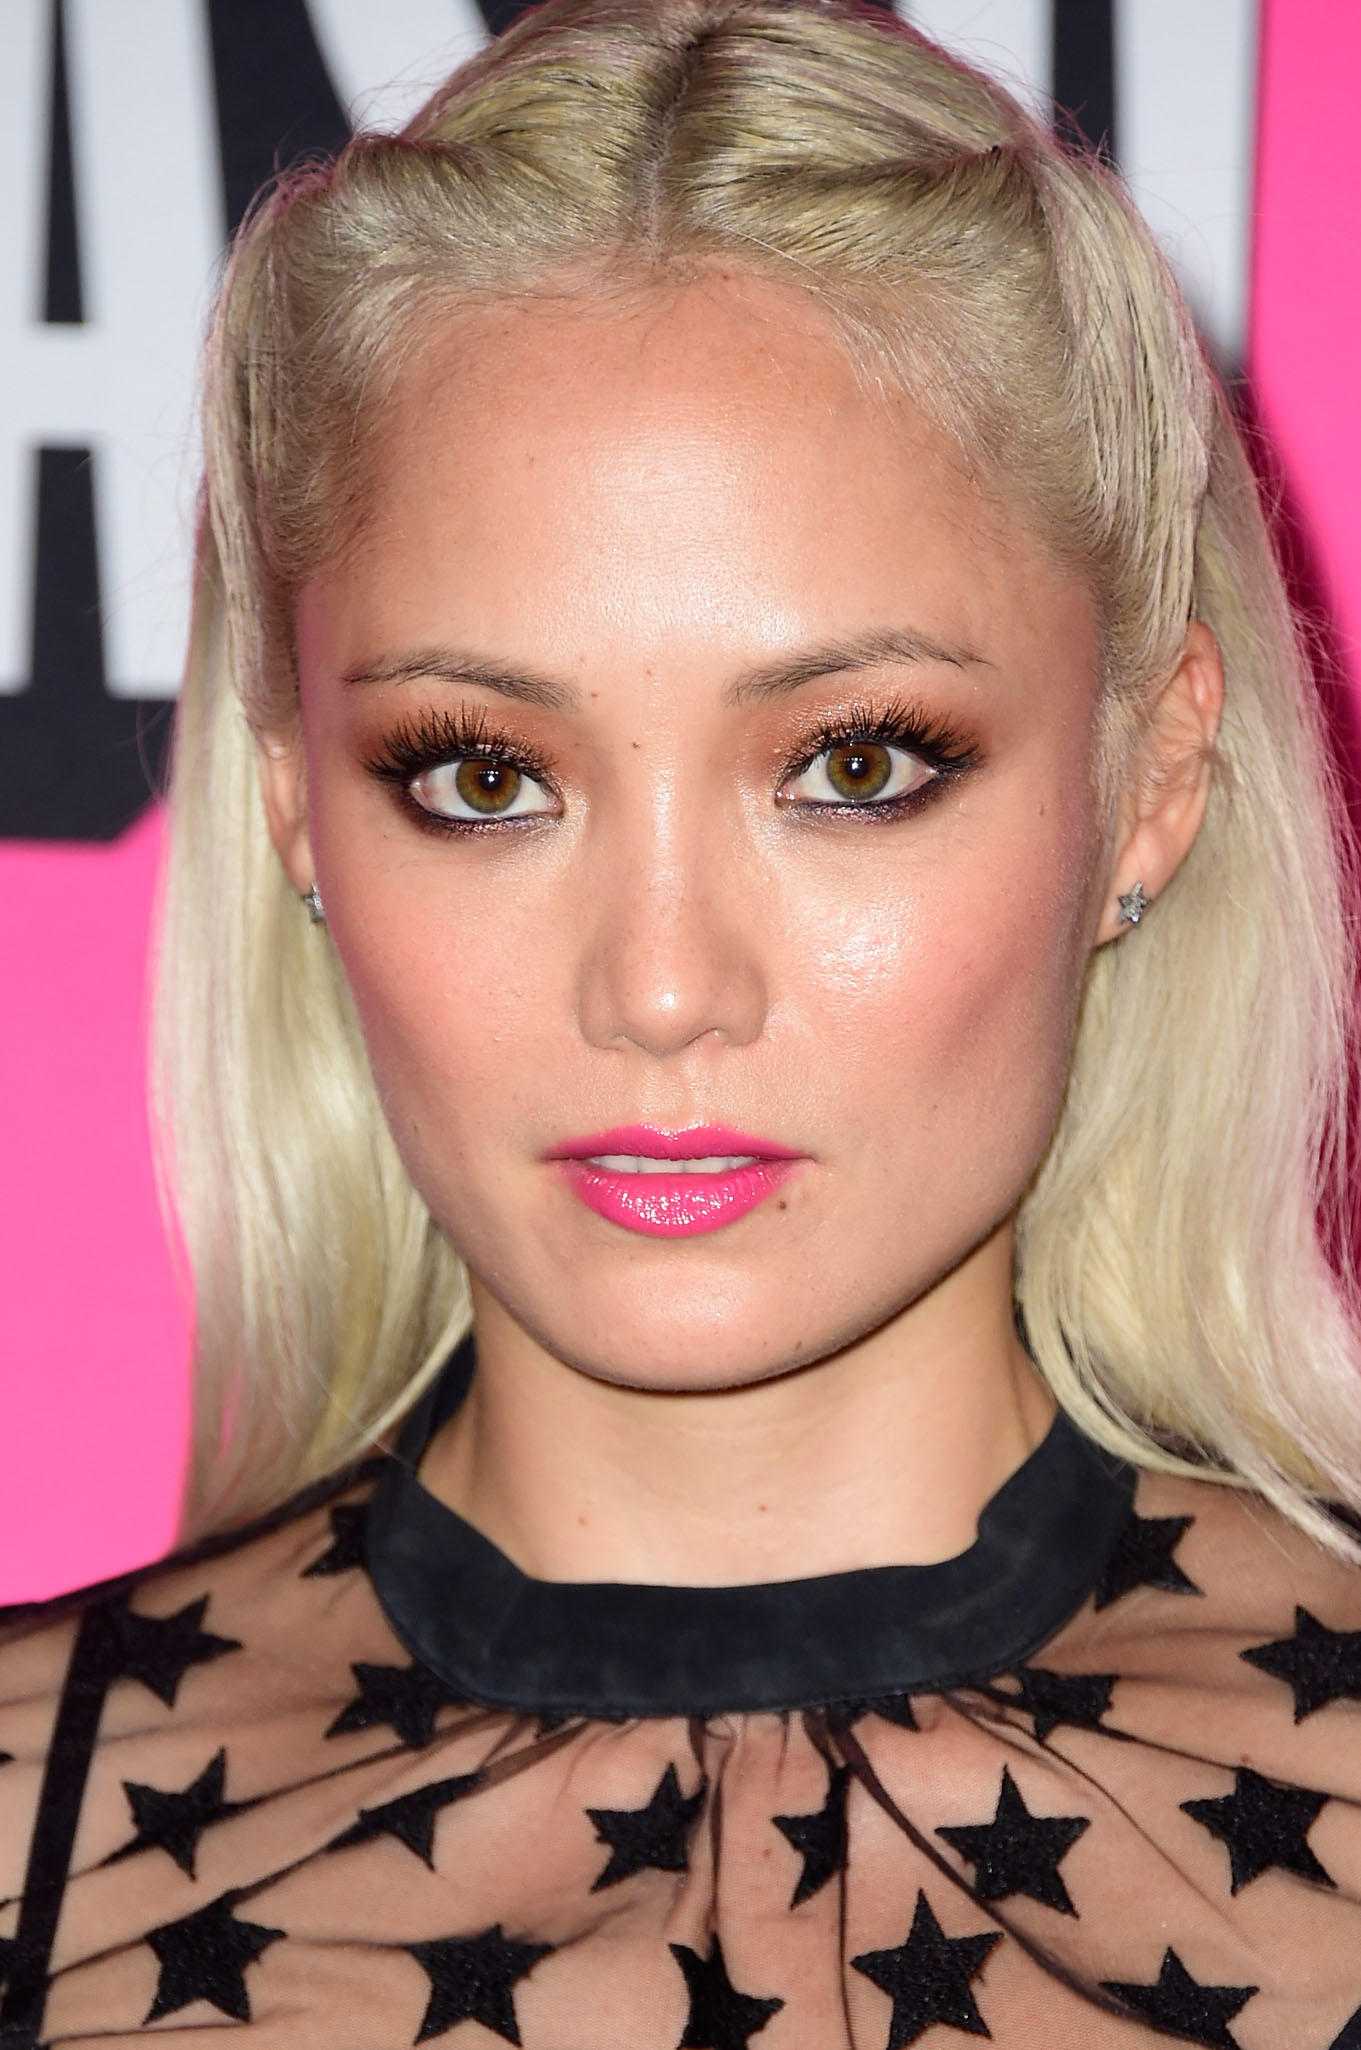 70+ Hot Pictures Of Pom Klementieff Who Plays Mantis In Marvel Cinematic Universe 13